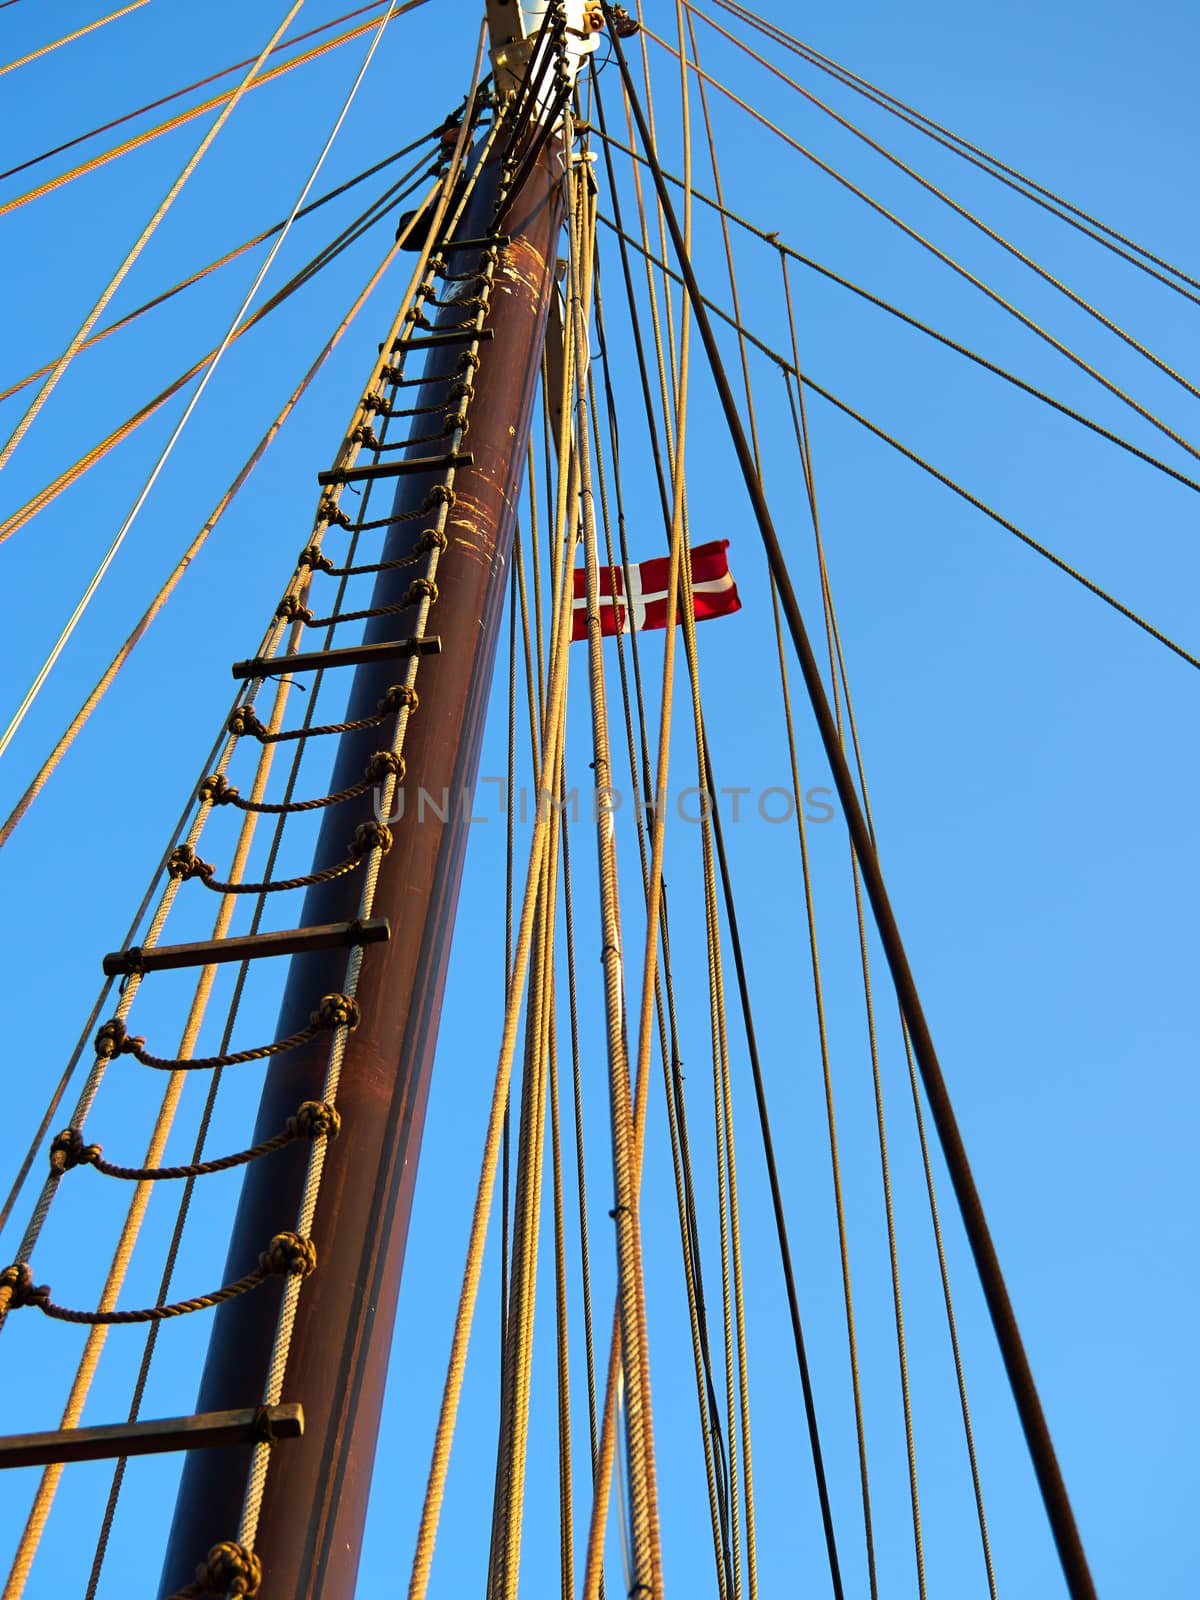 Sailing masts of traditional vintage wooden tallships sky background